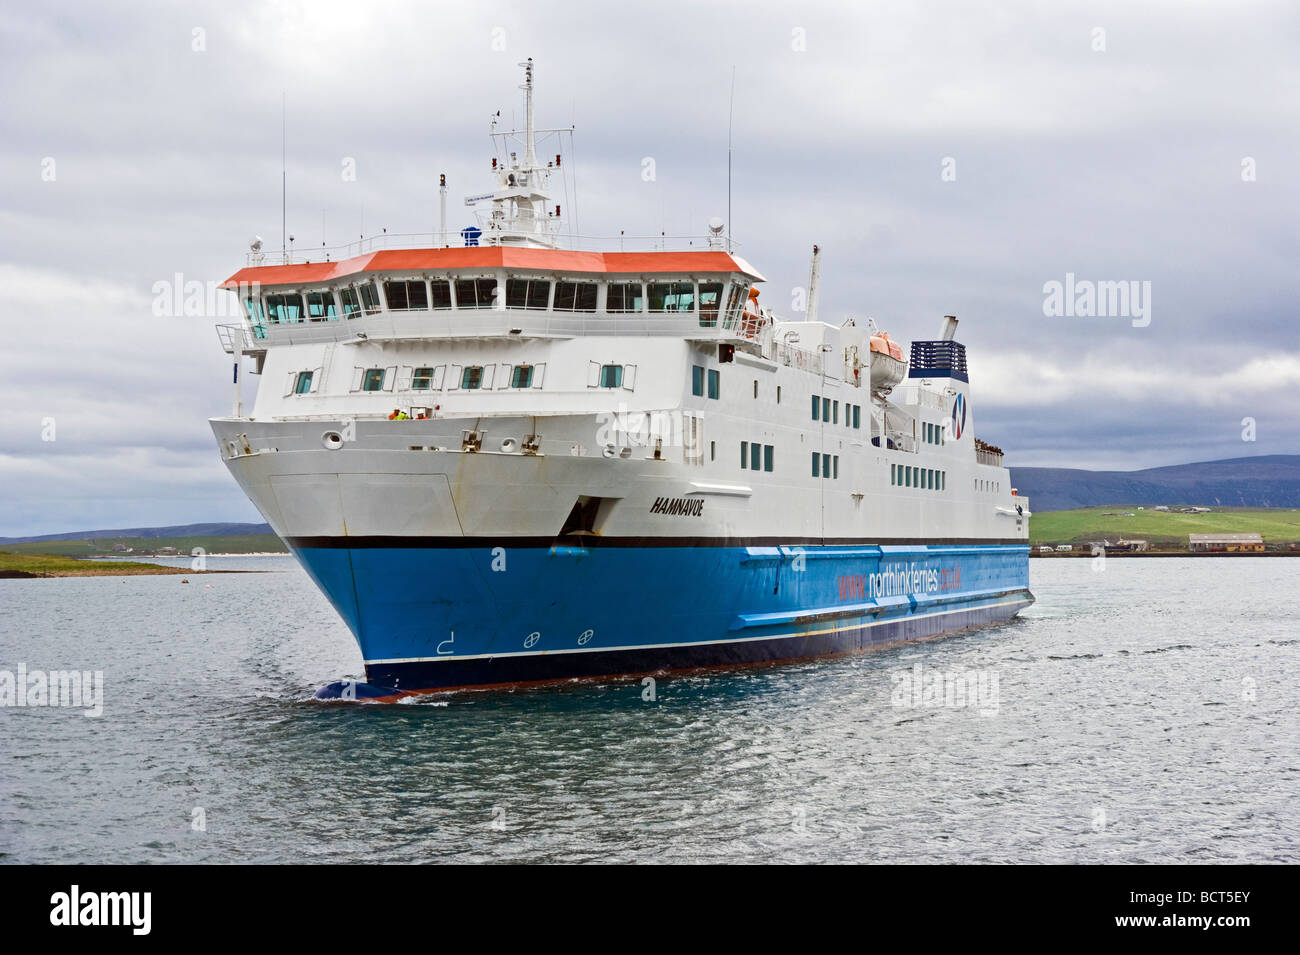 North Link Ferries car ferry m.s. Hamnavoe approaches Stromness pier on conclusion of its journey from Scrabster Stock Photo